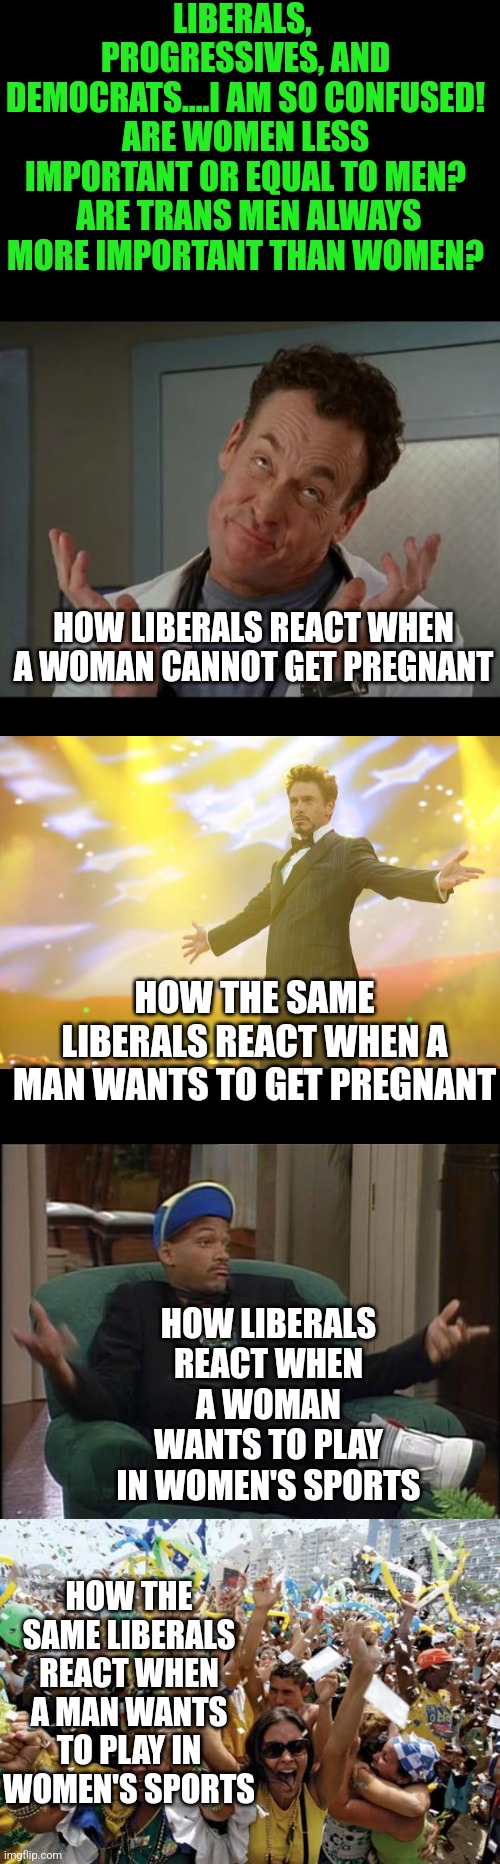 Remember the glass ceiling? It's hilarious how a man who "self identifes" as a woman is more important than a woman |  LIBERALS,  PROGRESSIVES, AND DEMOCRATS....I AM SO CONFUSED! ARE WOMEN LESS IMPORTANT OR EQUAL TO MEN?  ARE TRANS MEN ALWAYS MORE IMPORTANT THAN WOMEN? HOW LIBERALS REACT WHEN A WOMAN CANNOT GET PREGNANT; HOW THE SAME LIBERALS REACT WHEN A MAN WANTS TO GET PREGNANT; HOW LIBERALS REACT WHEN A WOMAN WANTS TO PLAY IN WOMEN'S SPORTS; HOW THE SAME LIBERALS REACT WHEN A MAN WANTS TO PLAY IN WOMEN'S SPORTS | image tagged in celebrate,liberal logic,hypocrisy,women,transgender,gender equality | made w/ Imgflip meme maker